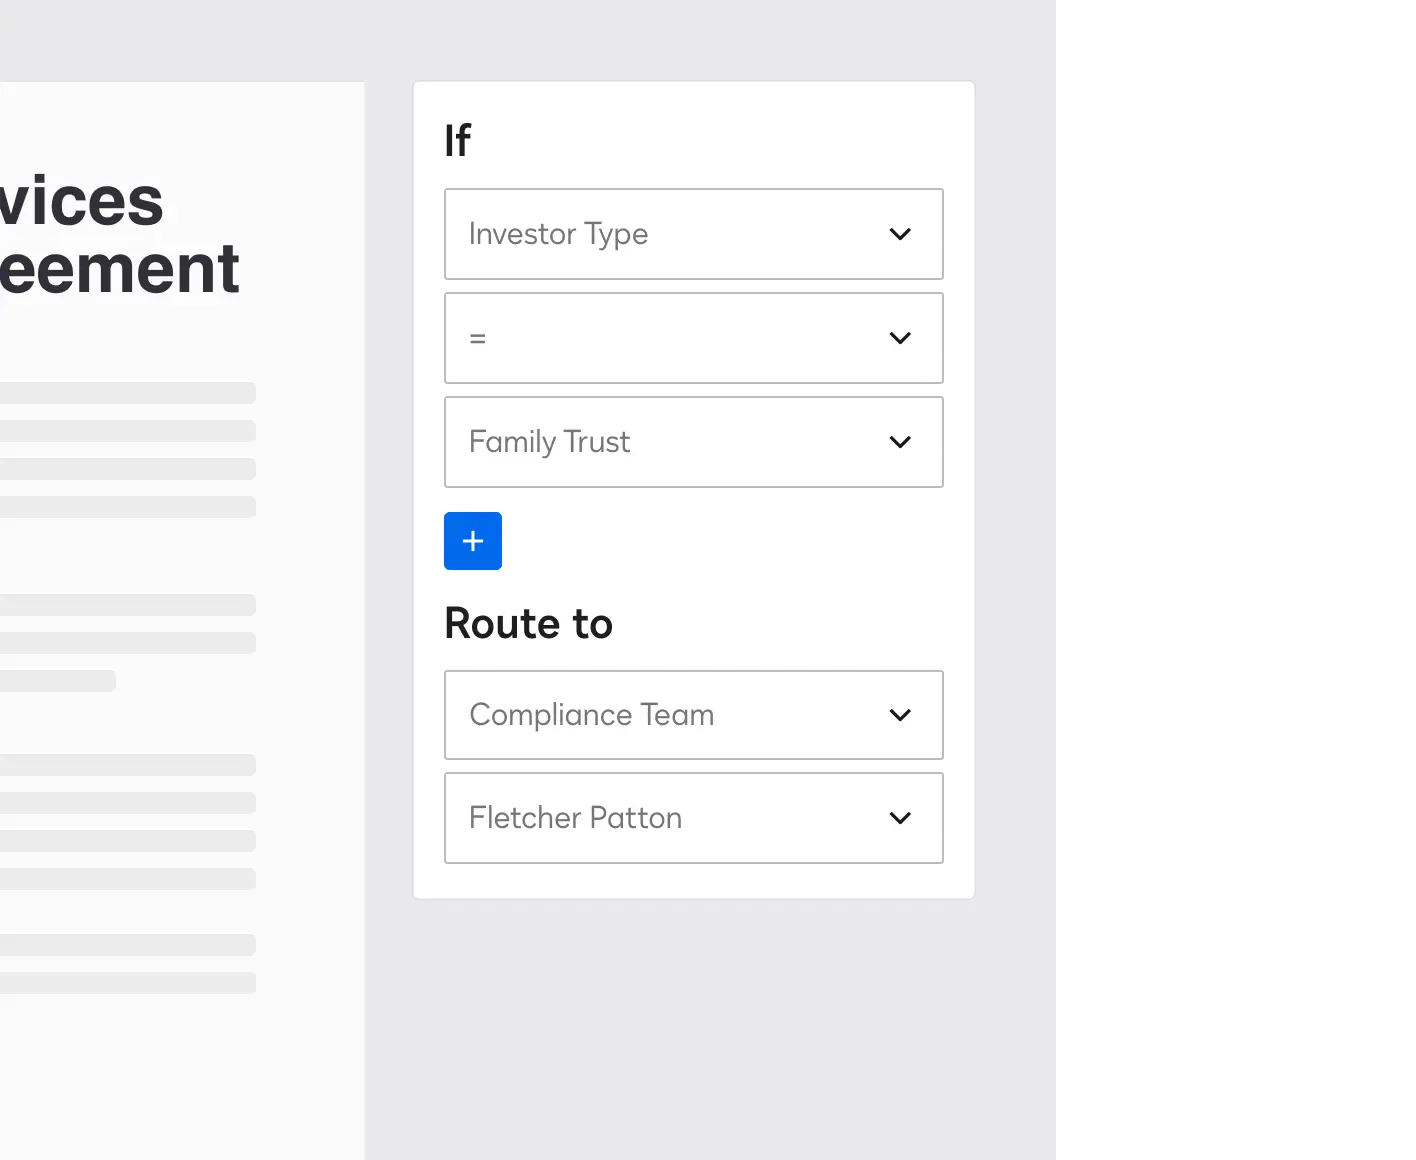 A configurable workflow in DocuSign eSignature allows the user to set who an agreement routes to when criteria in other fields are met.